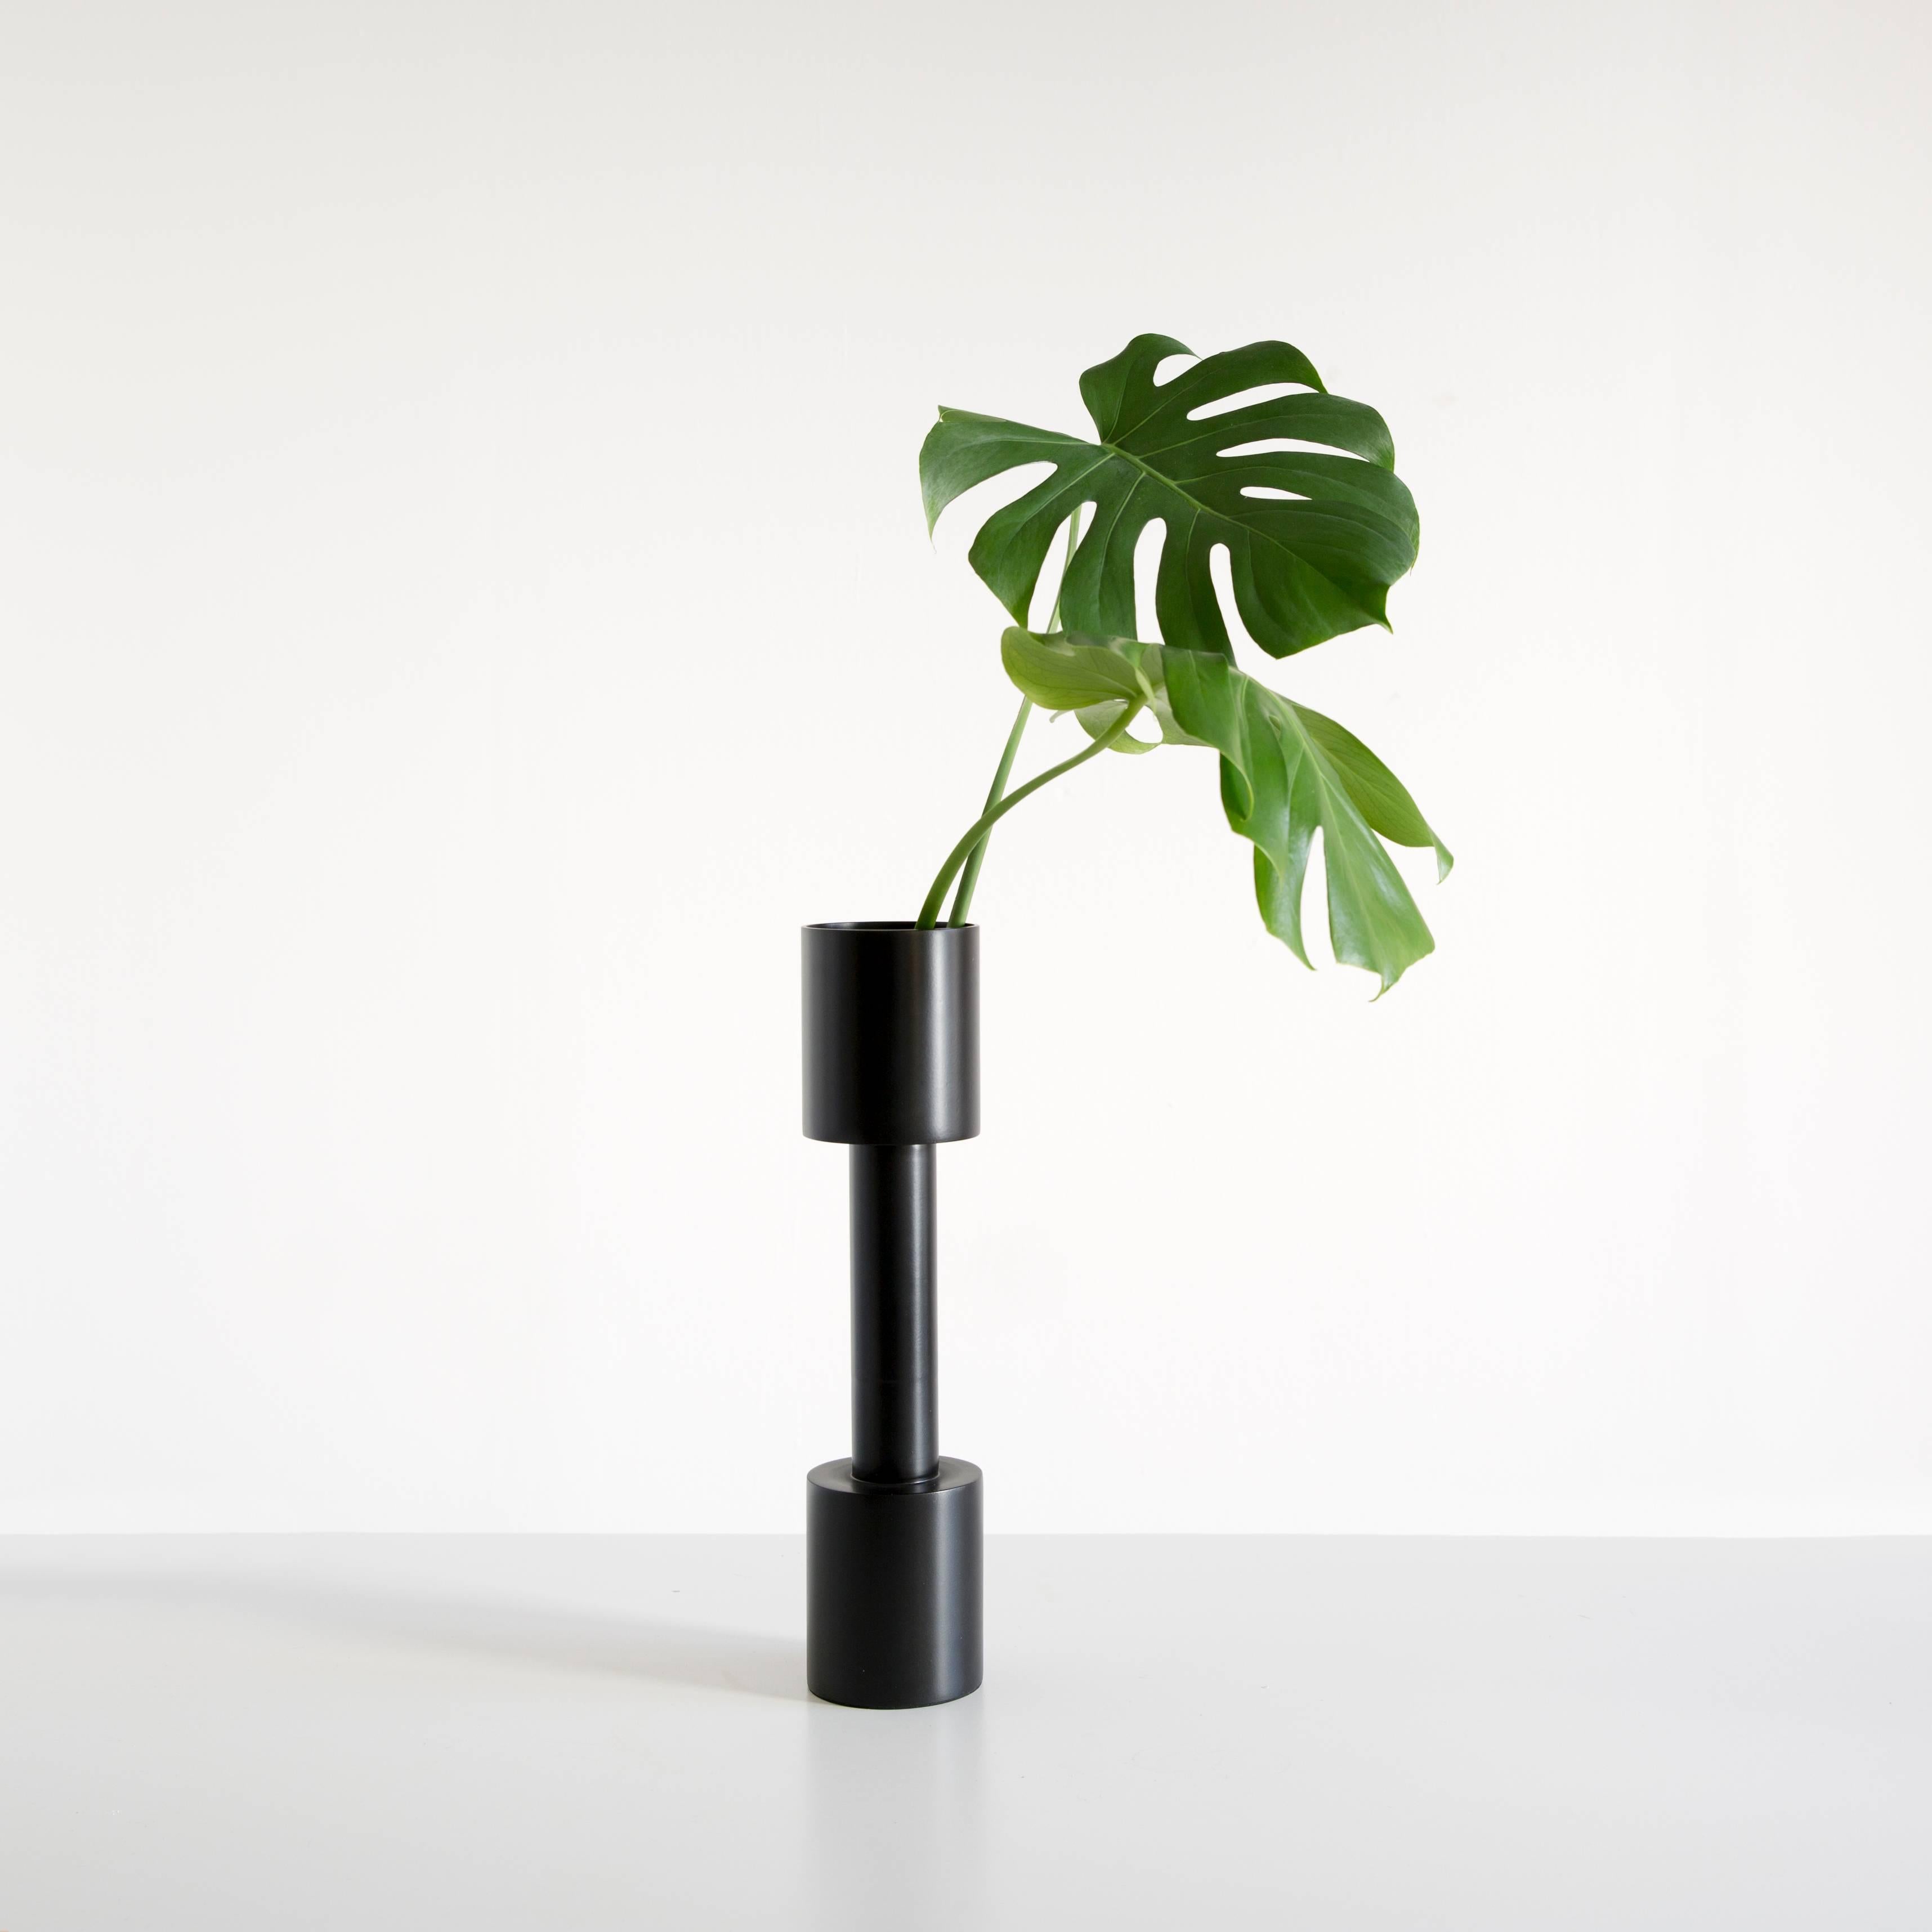 With its geometric, minimal and austere shape the Rec-cut vase is a sculptural counterpart to the bouquet of flowers they hold. Rec-cut vase loves to hold just one flower, it´s slim hip keeps the posy together, while the stems have space and